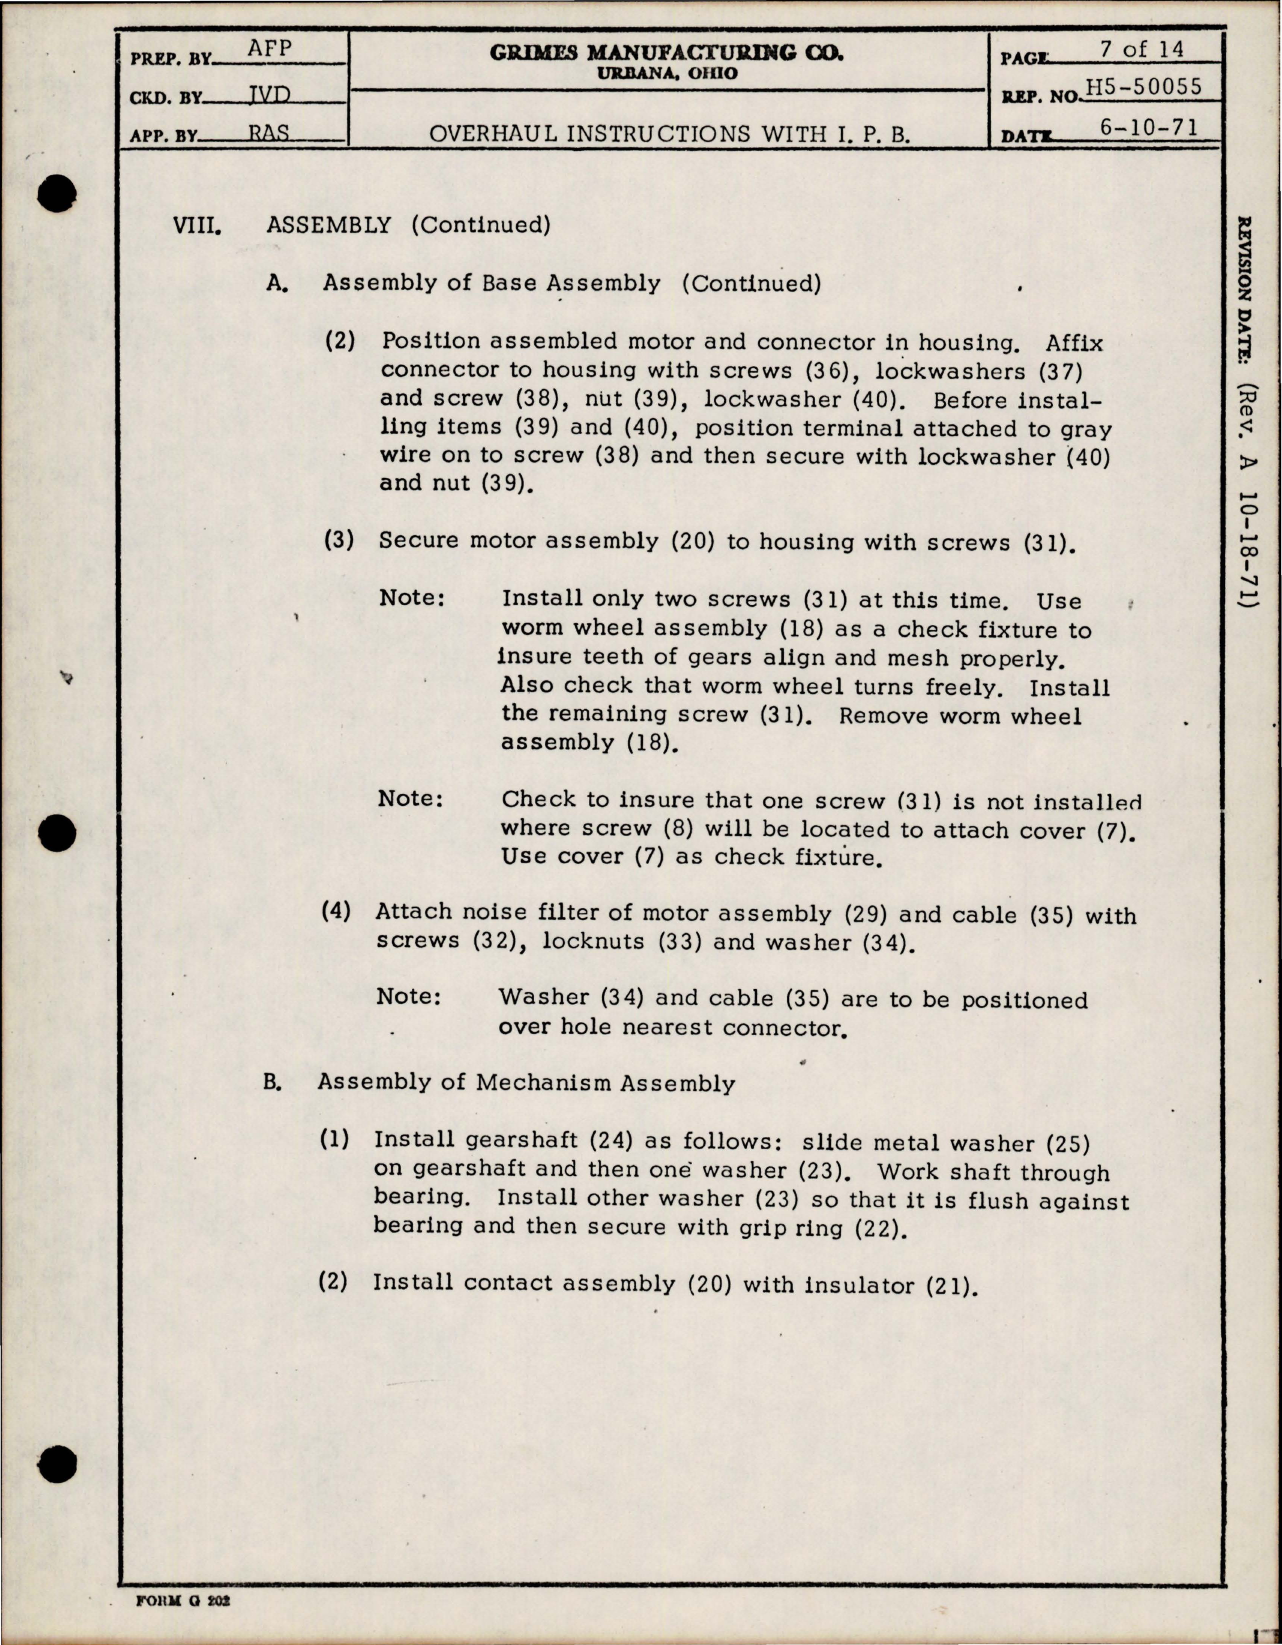 Sample page 7 from AirCorps Library document: Overhaul Instructions with Parts for Navigational Aircraft Rotating Warning Light 